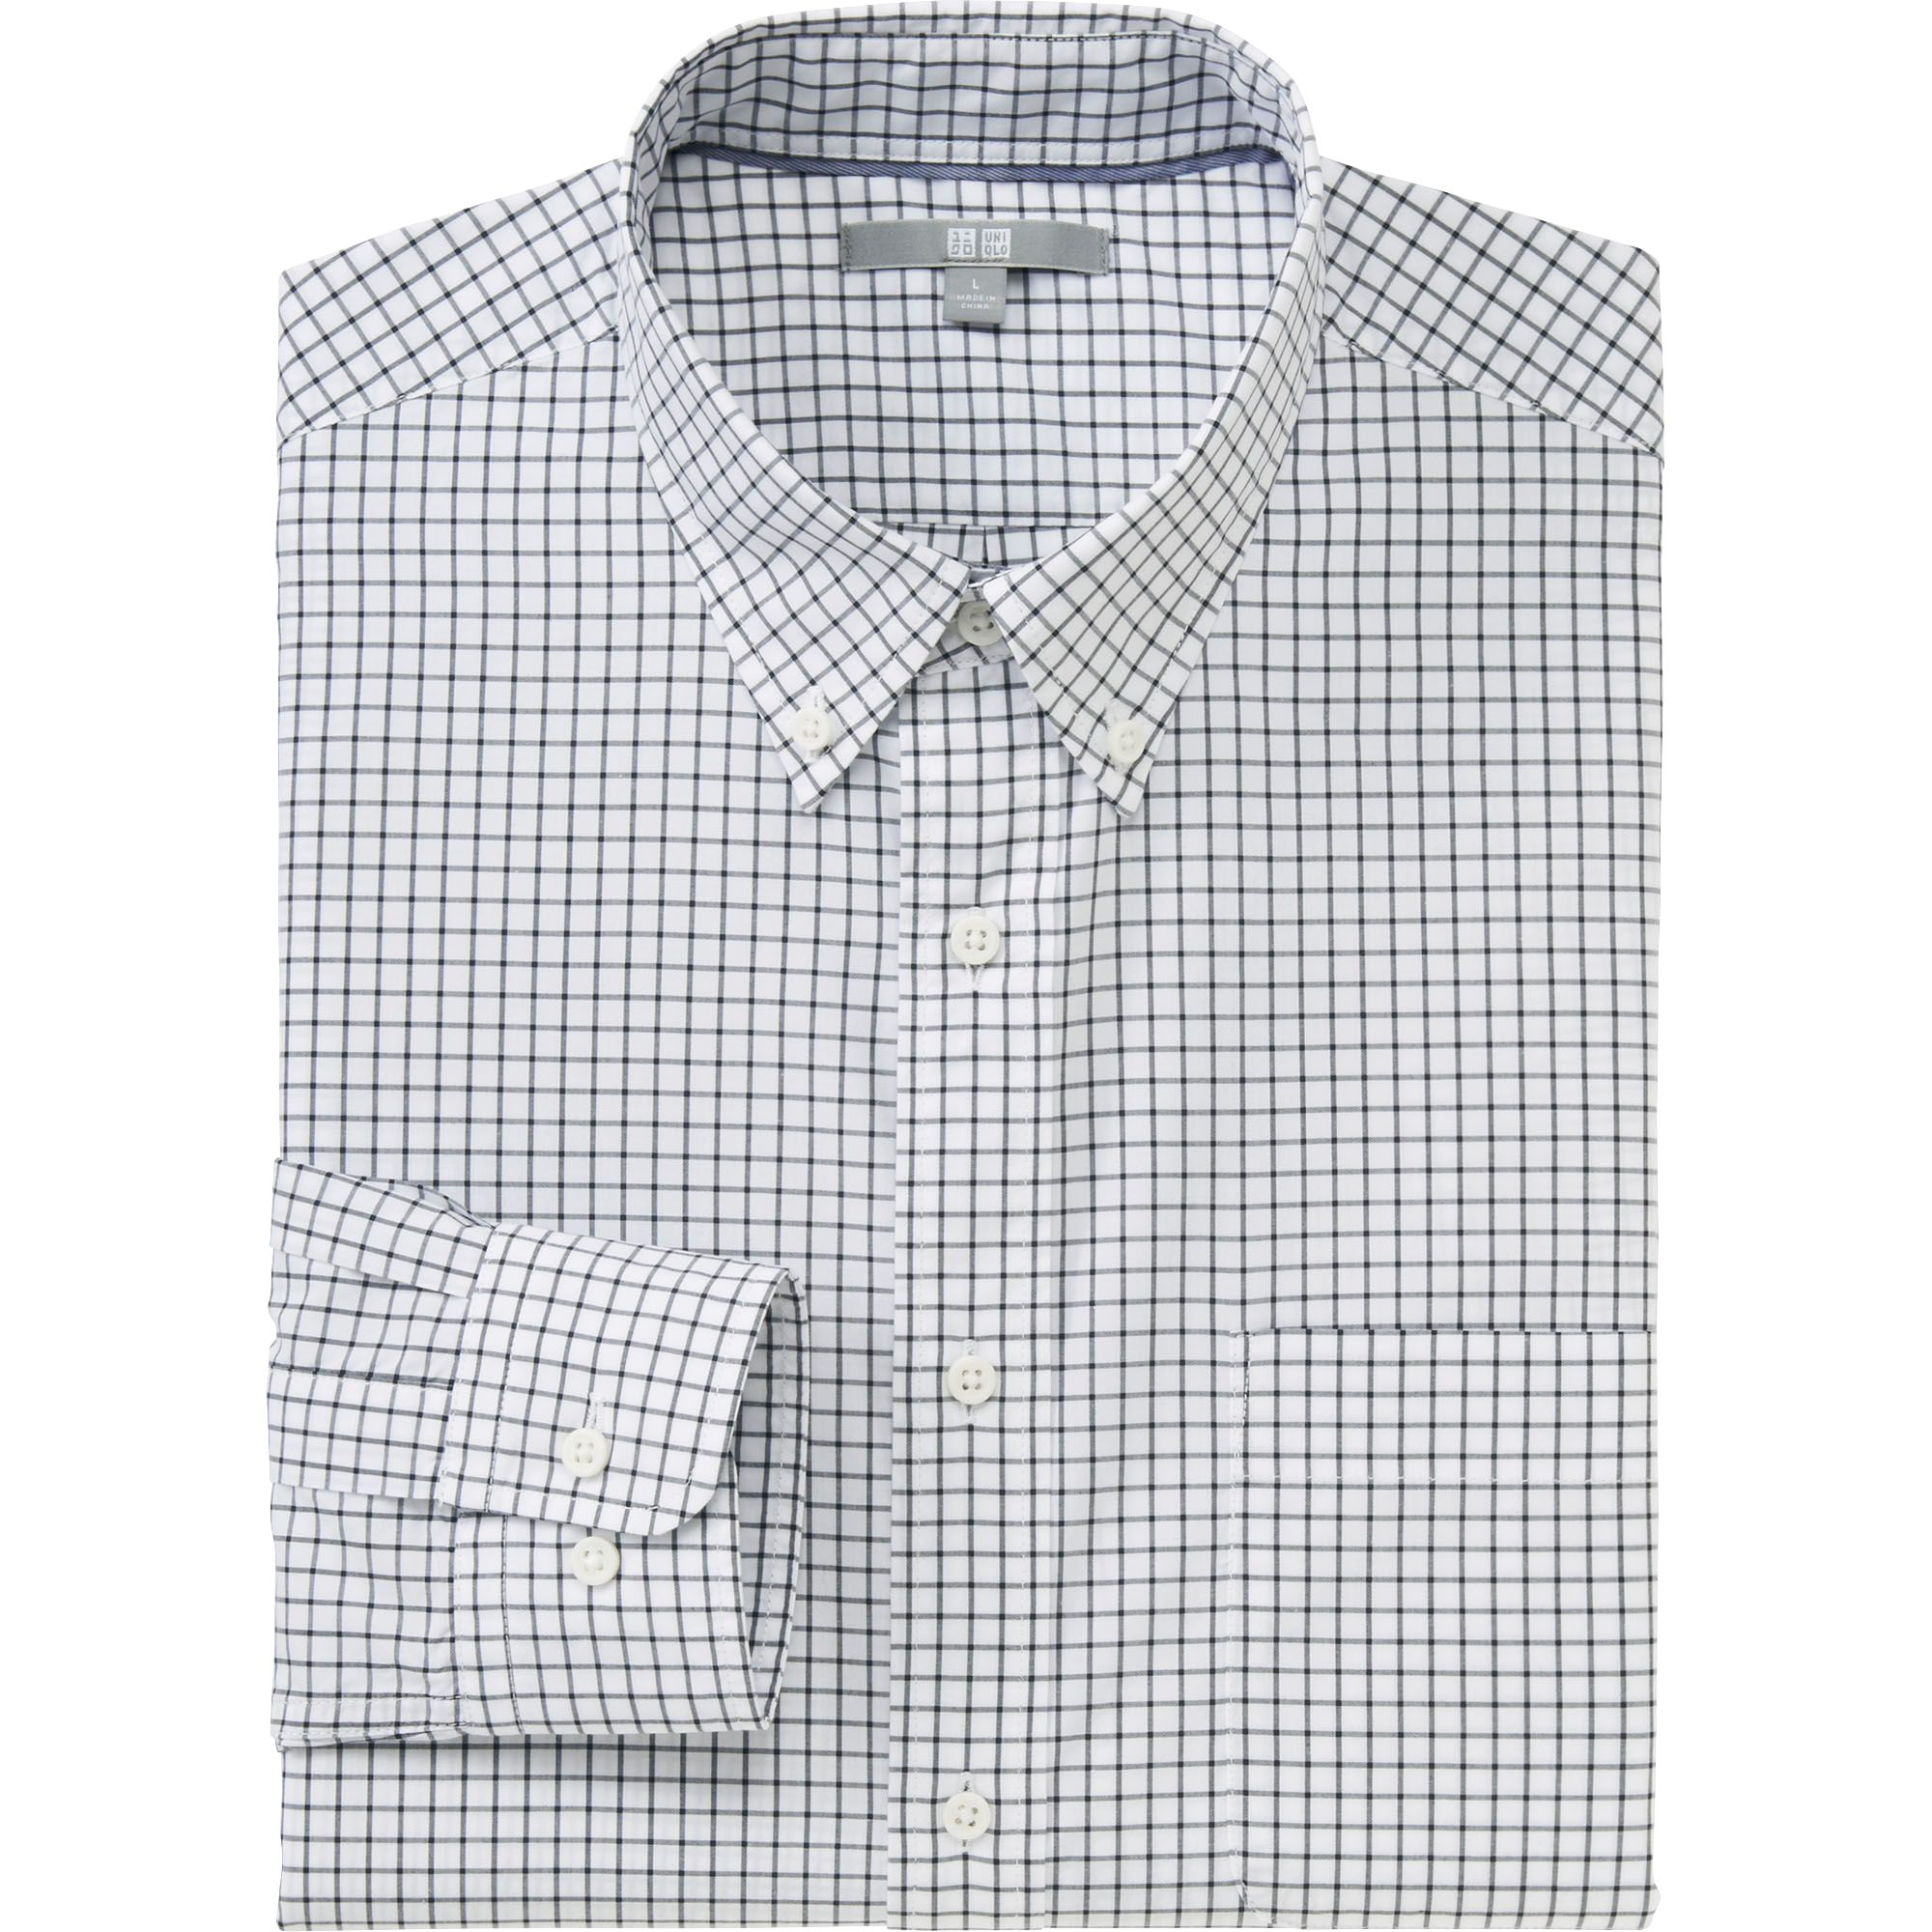 Uniqlo Men Extra Fine Cotton Broadcloth Checkered Long Sleeve Shirt in ...